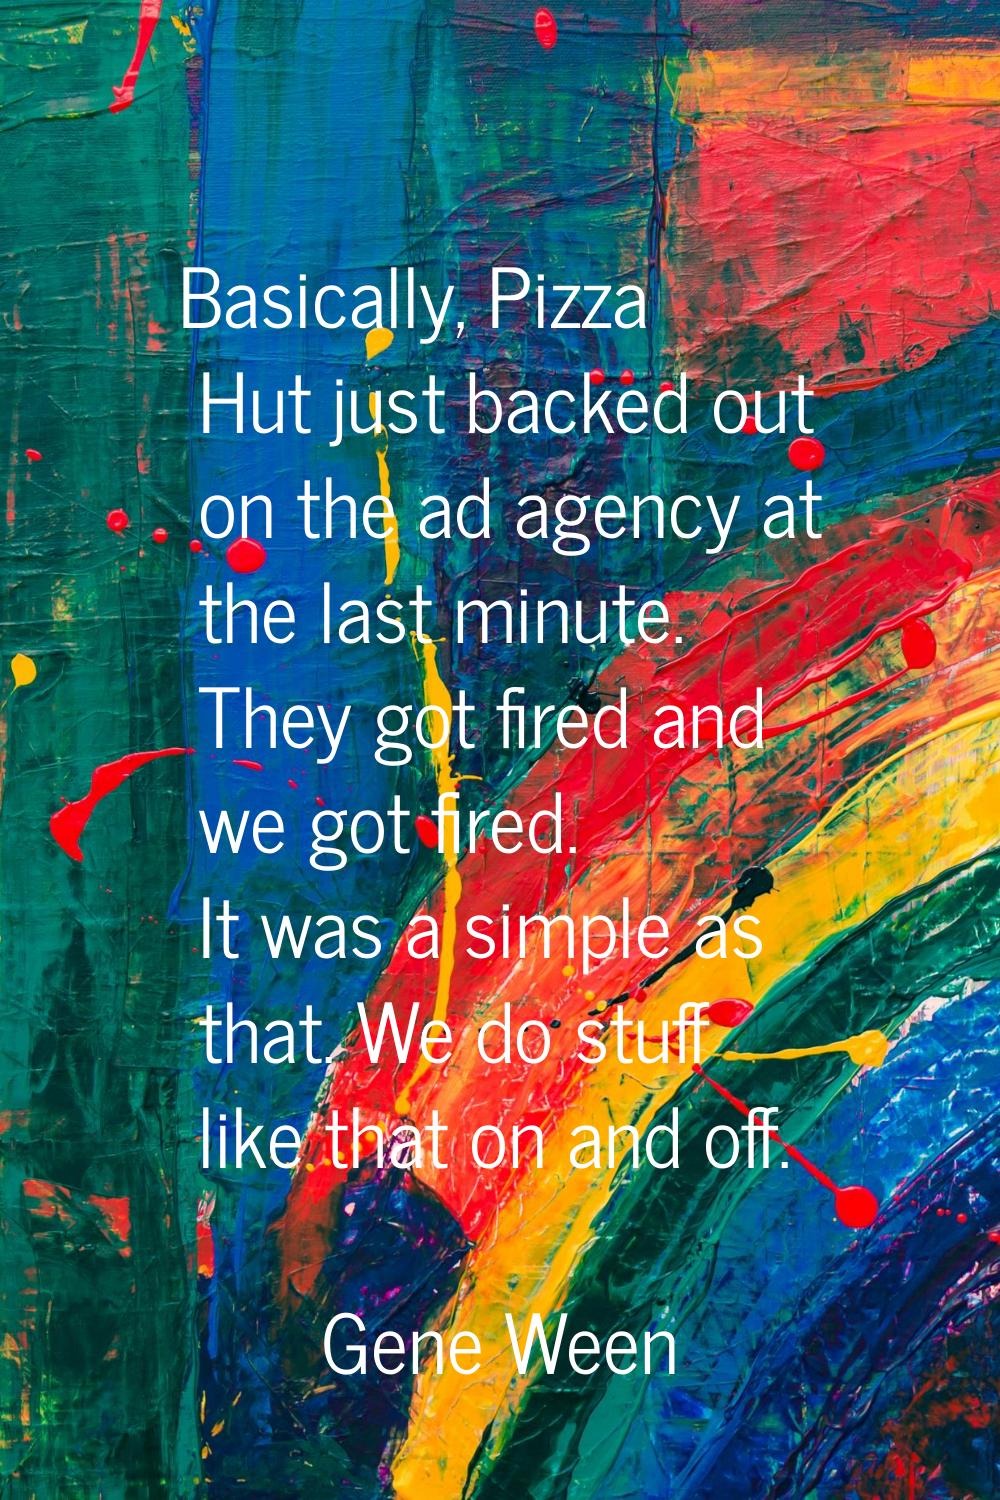 Basically, Pizza Hut just backed out on the ad agency at the last minute. They got fired and we got